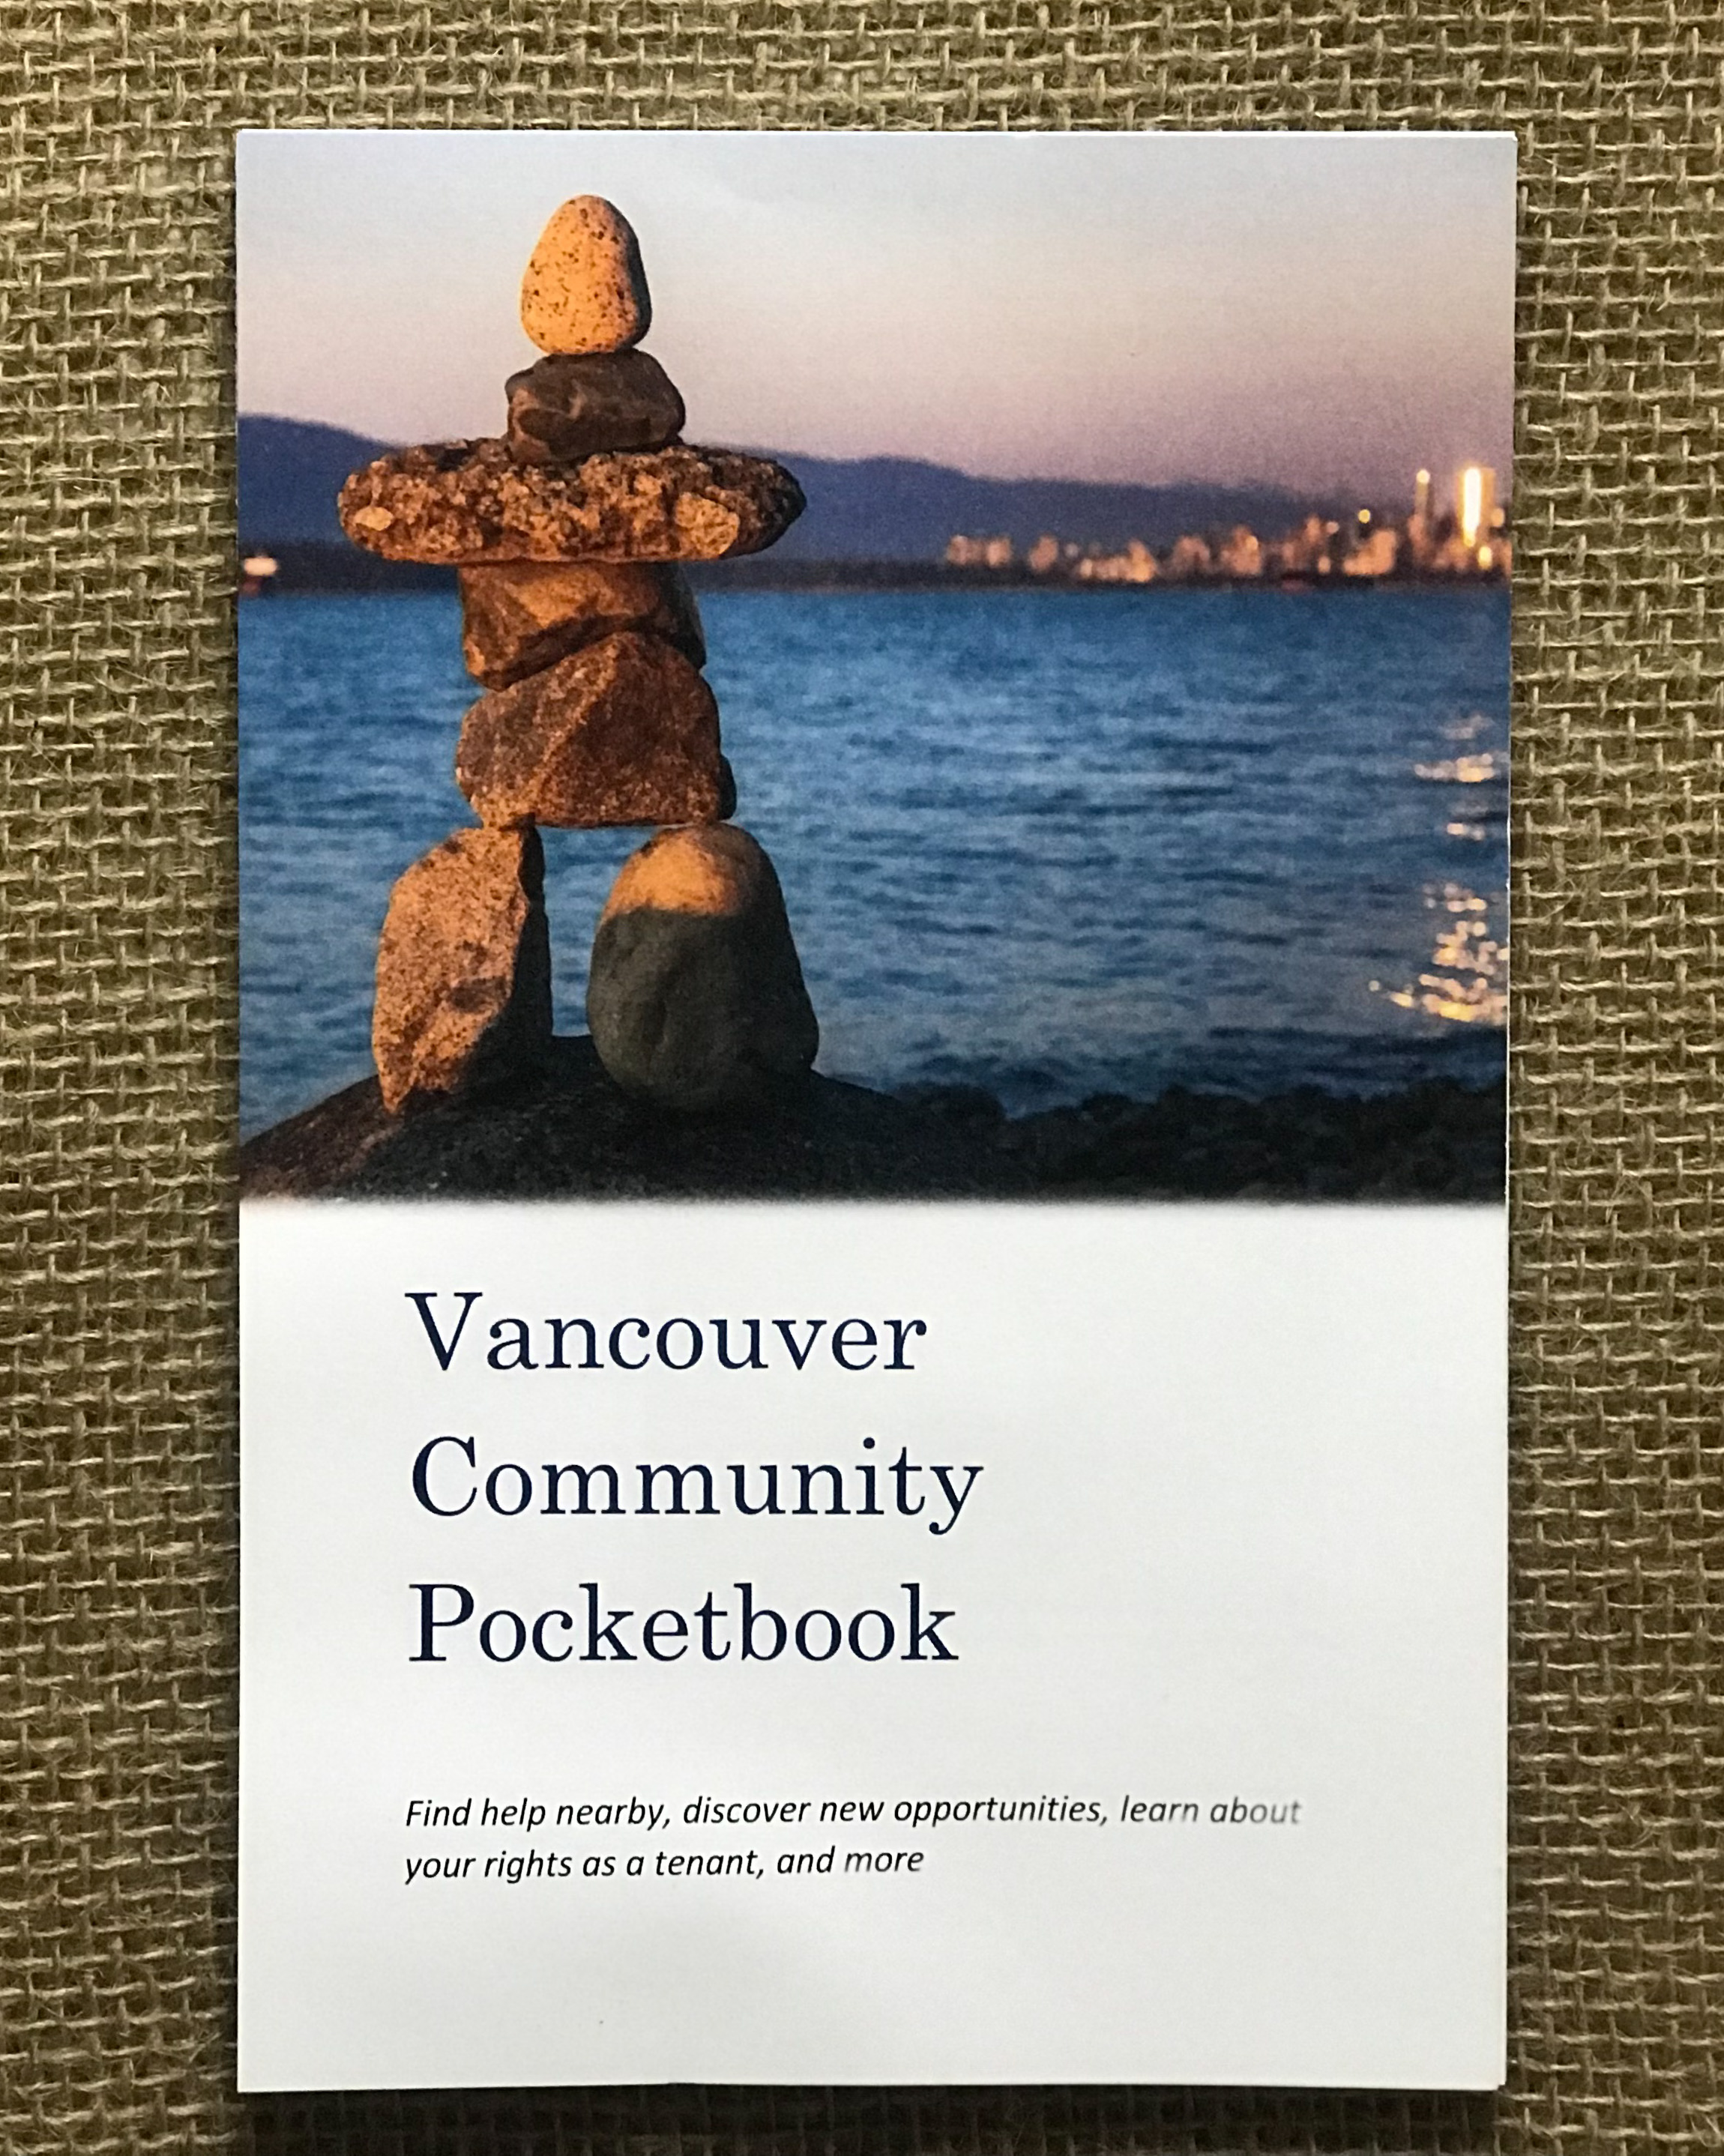 The Vancouver Community Pocketbook